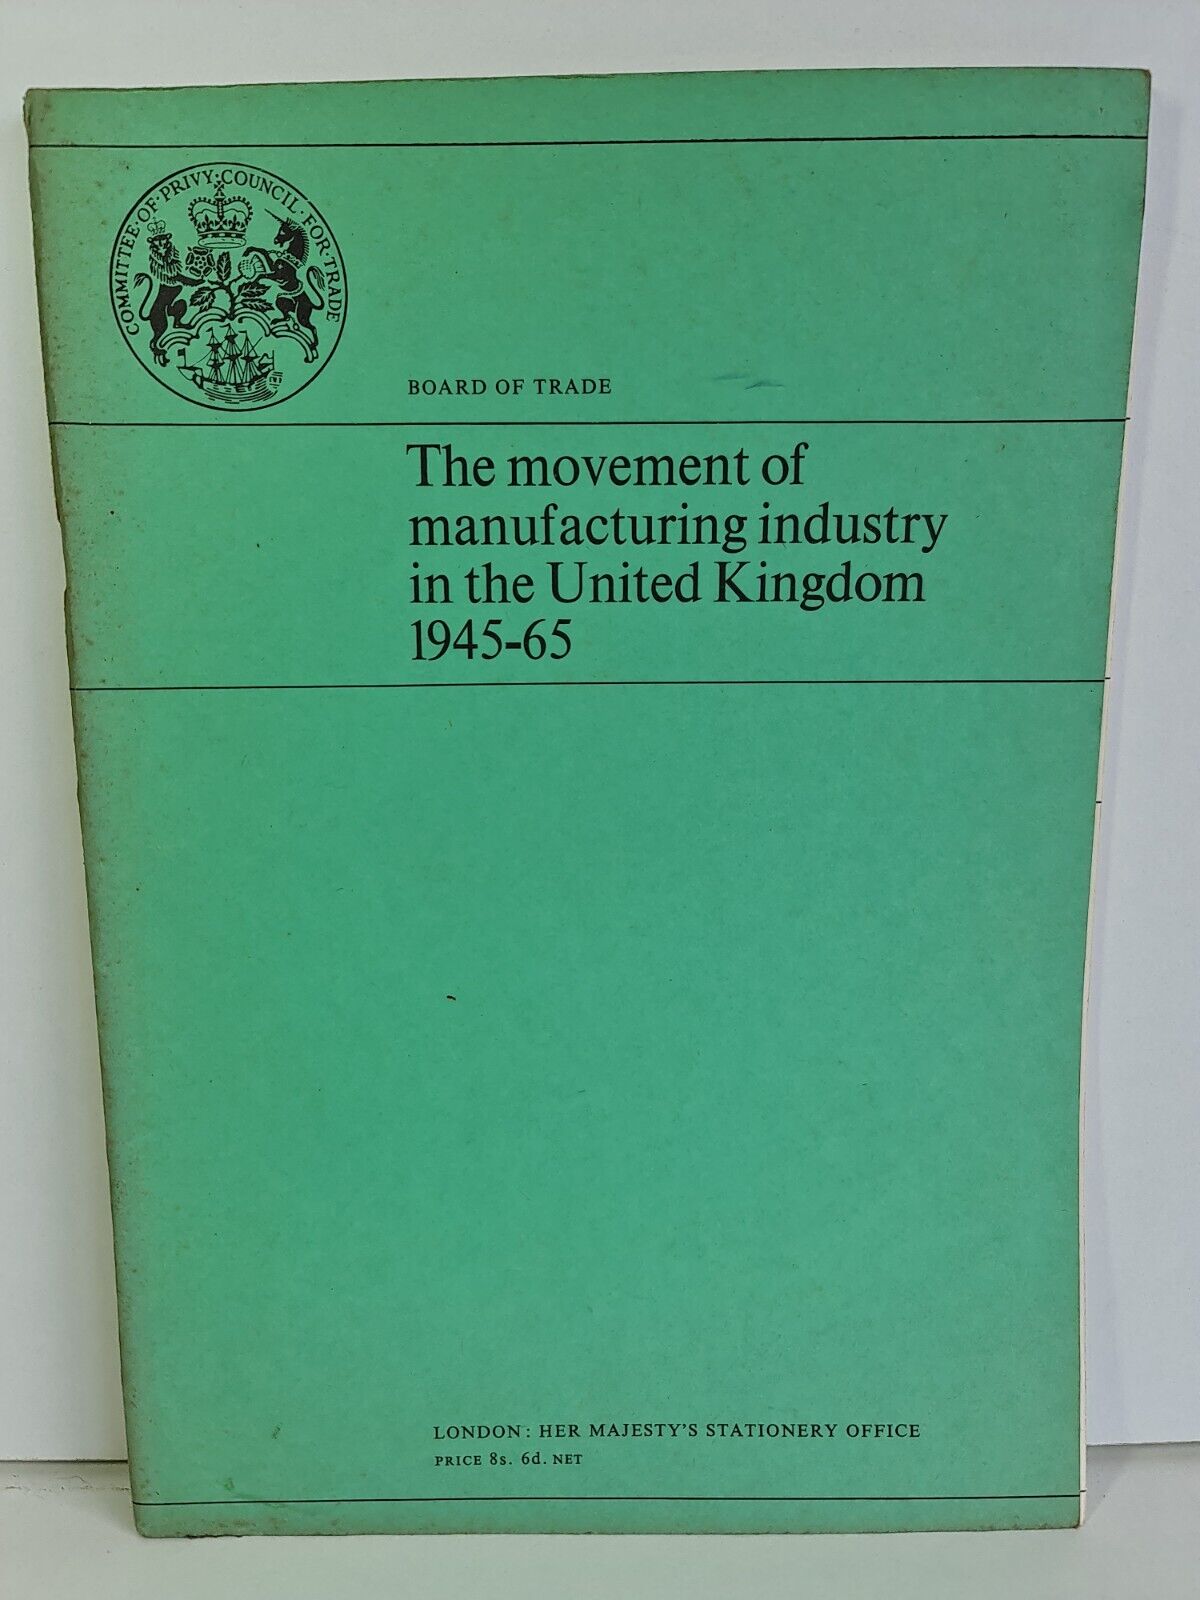 The Movement of Manufacturing Industry in the United Kingdom 1945-65